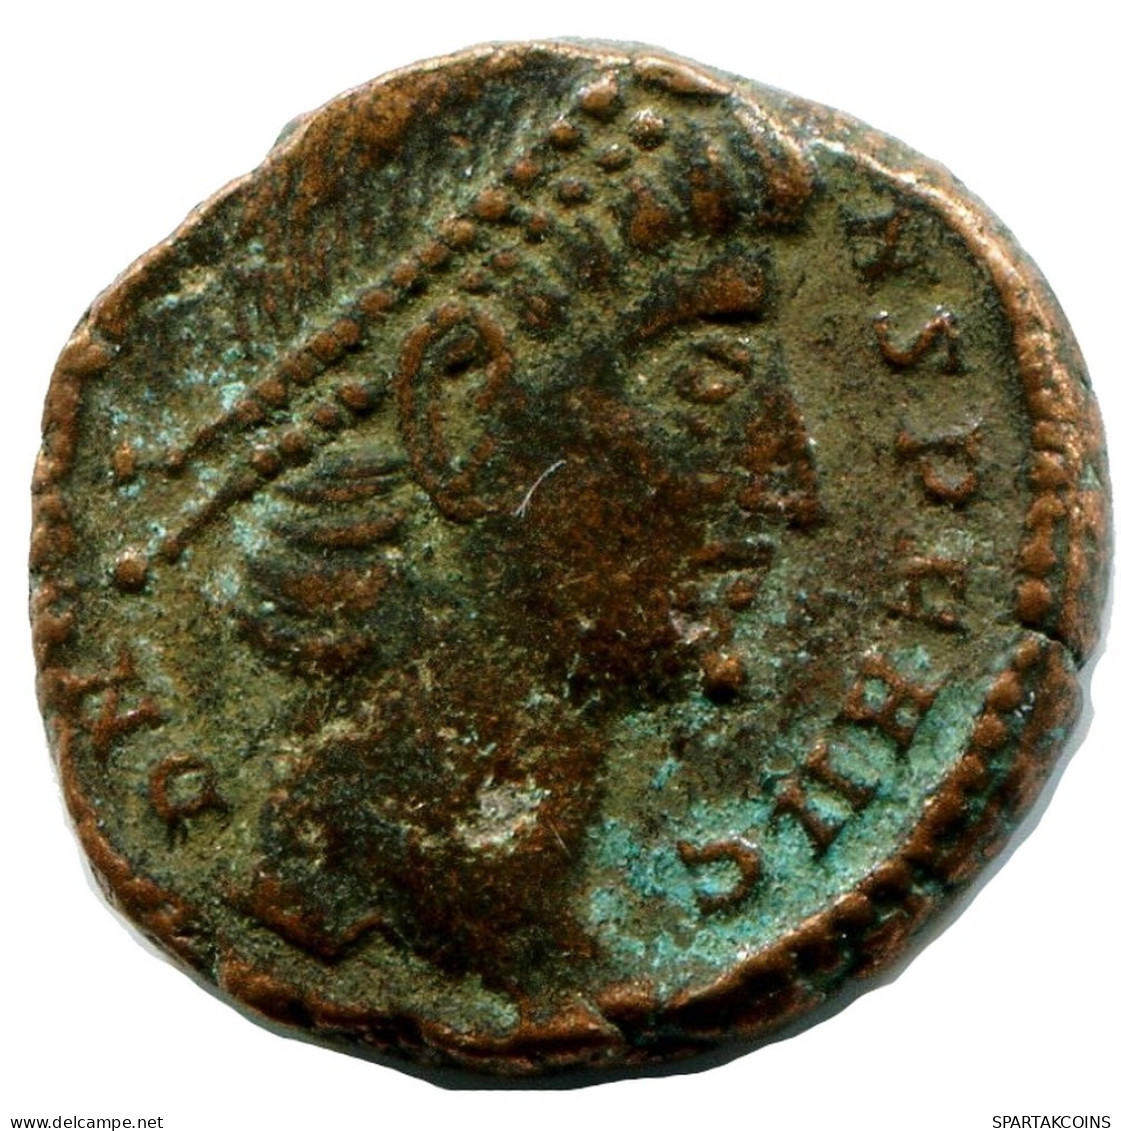 CONSTANS MINTED IN HERACLEA FROM THE ROYAL ONTARIO MUSEUM #ANC11557.14.E.A - The Christian Empire (307 AD To 363 AD)